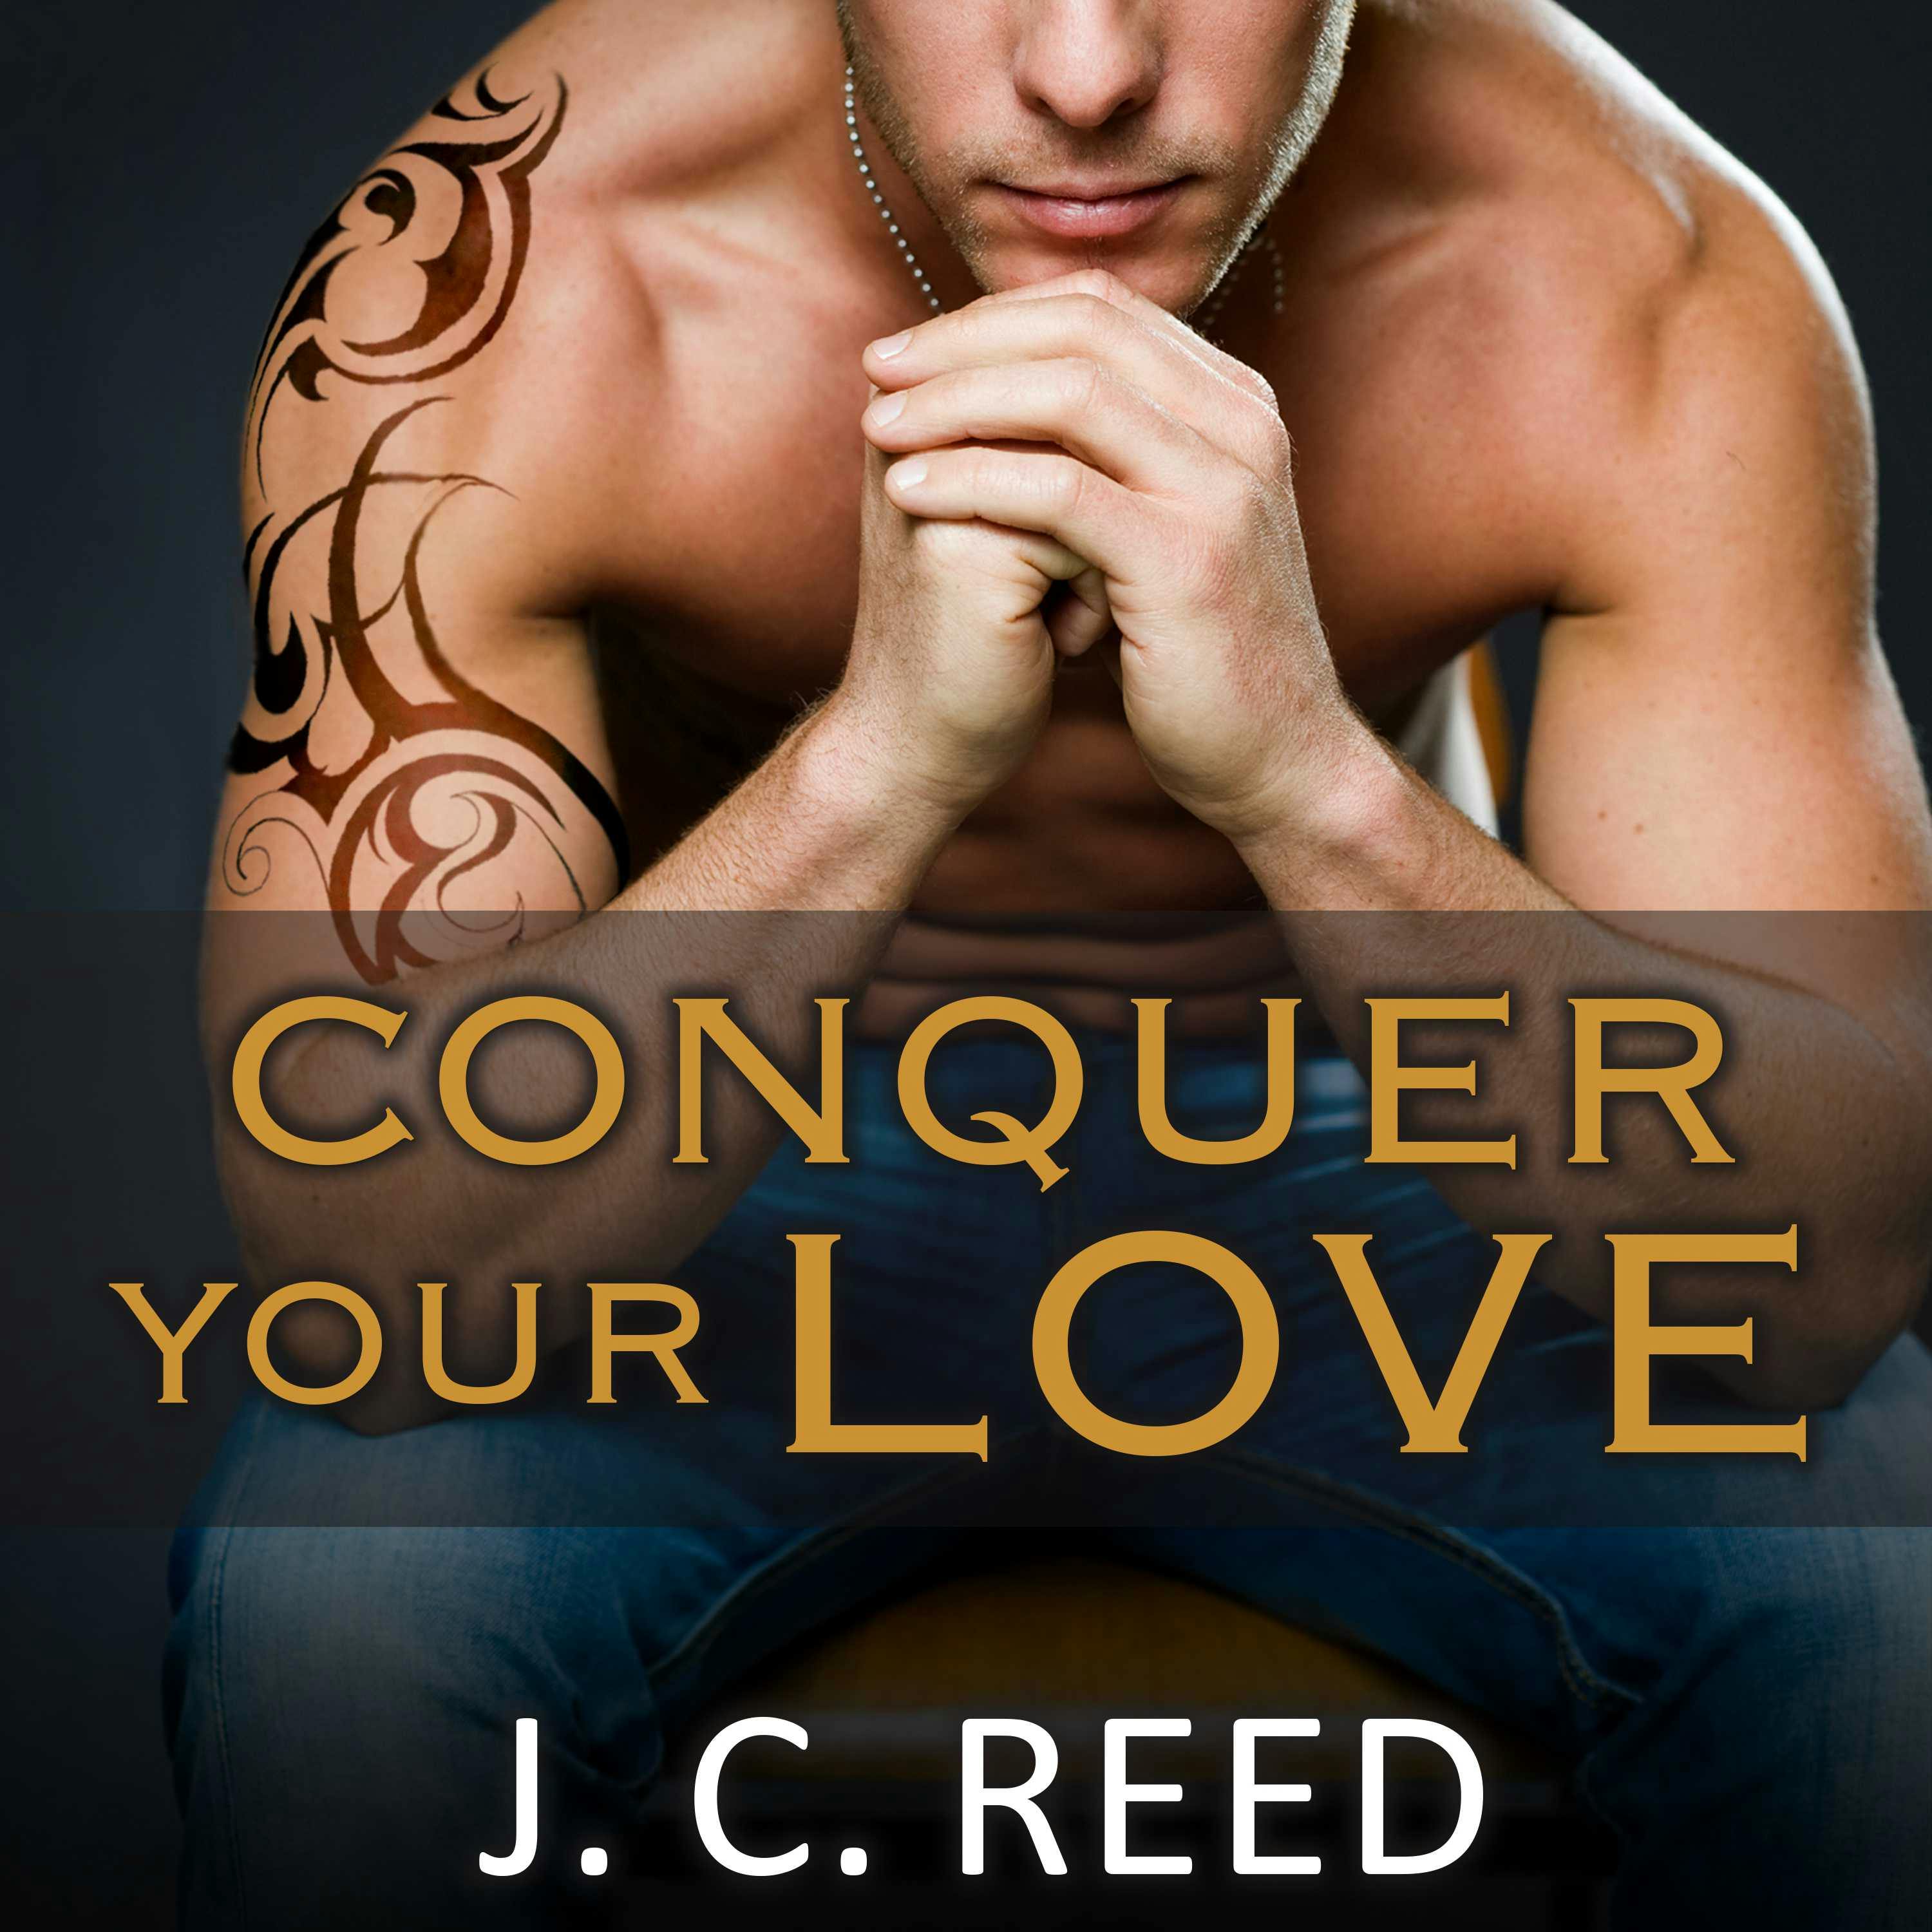 Conquer Your Love - J. C. Reed